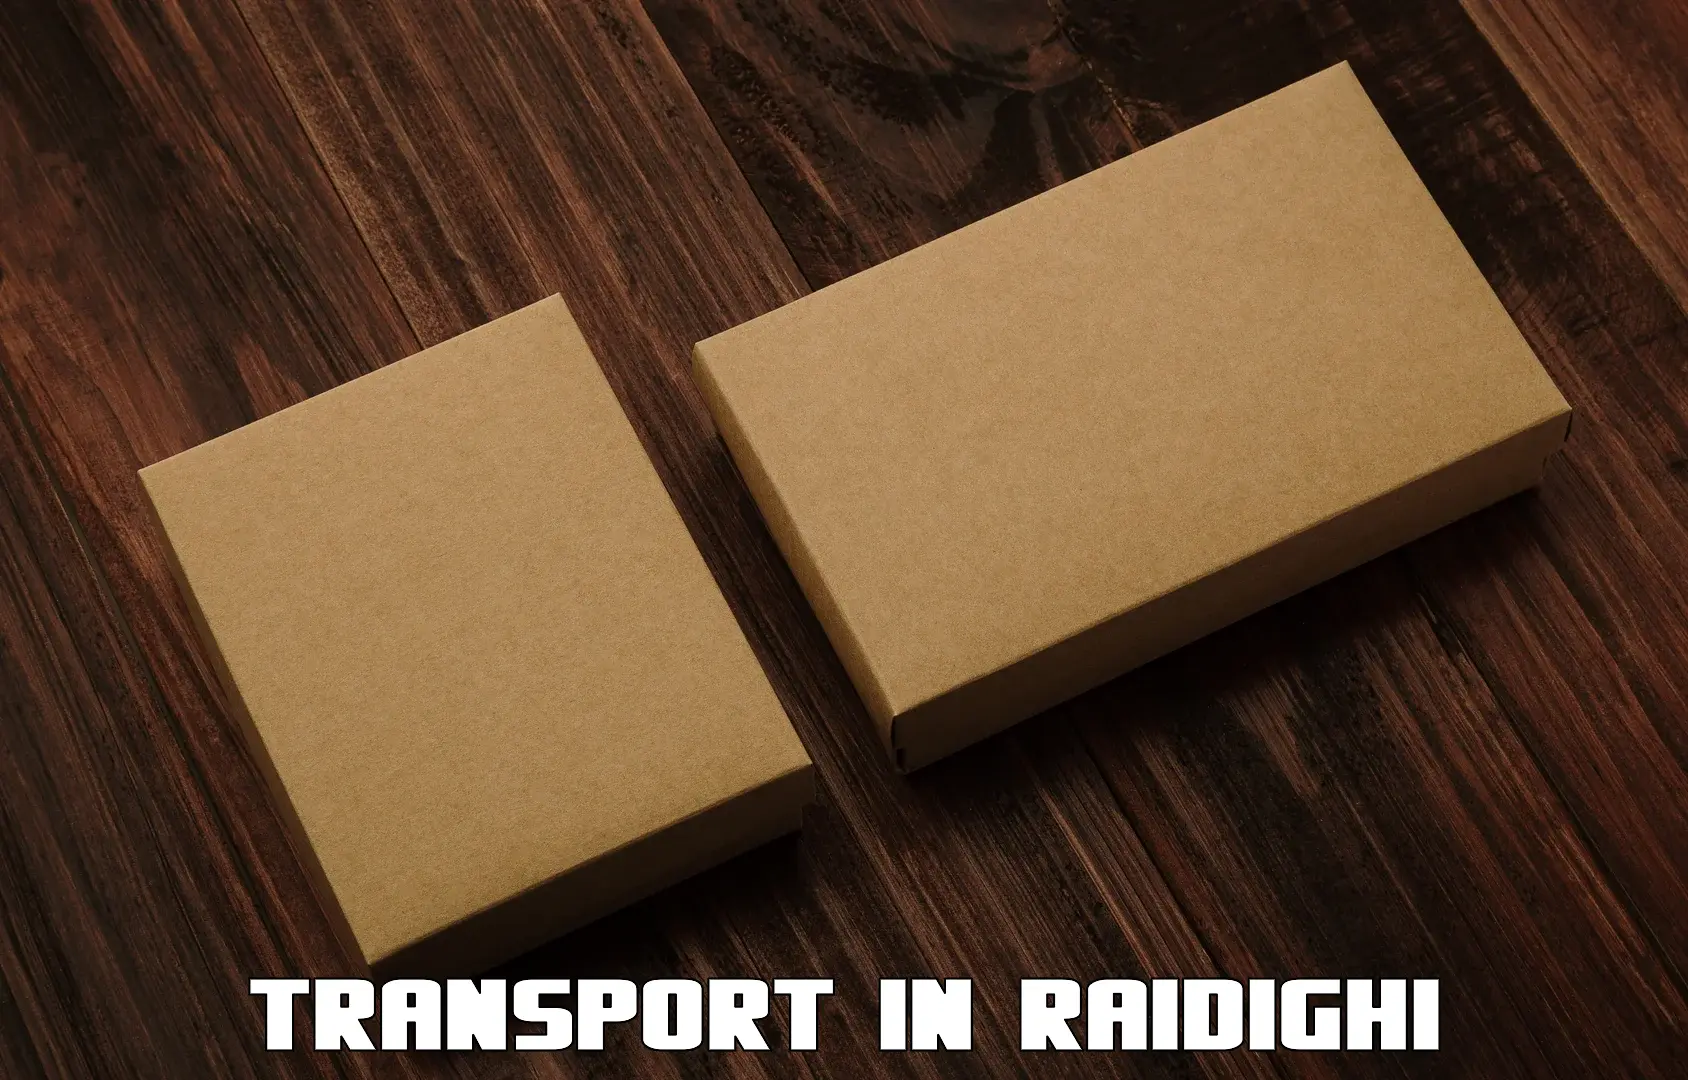 Road transport online services in Raidighi